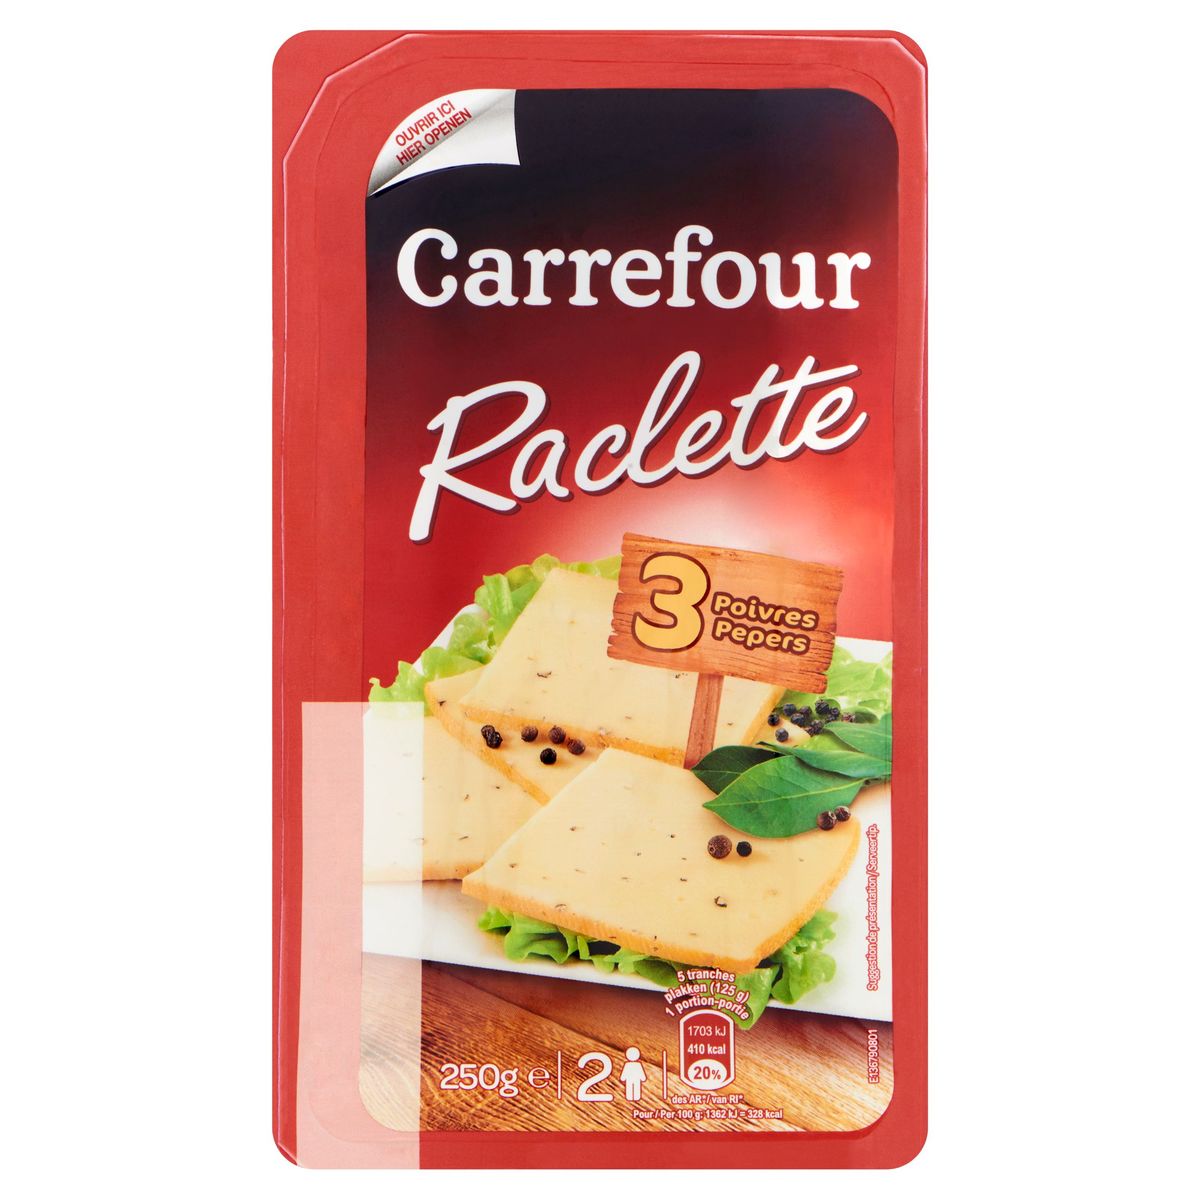 Carrefour Raclette 3 Pepers 250 g